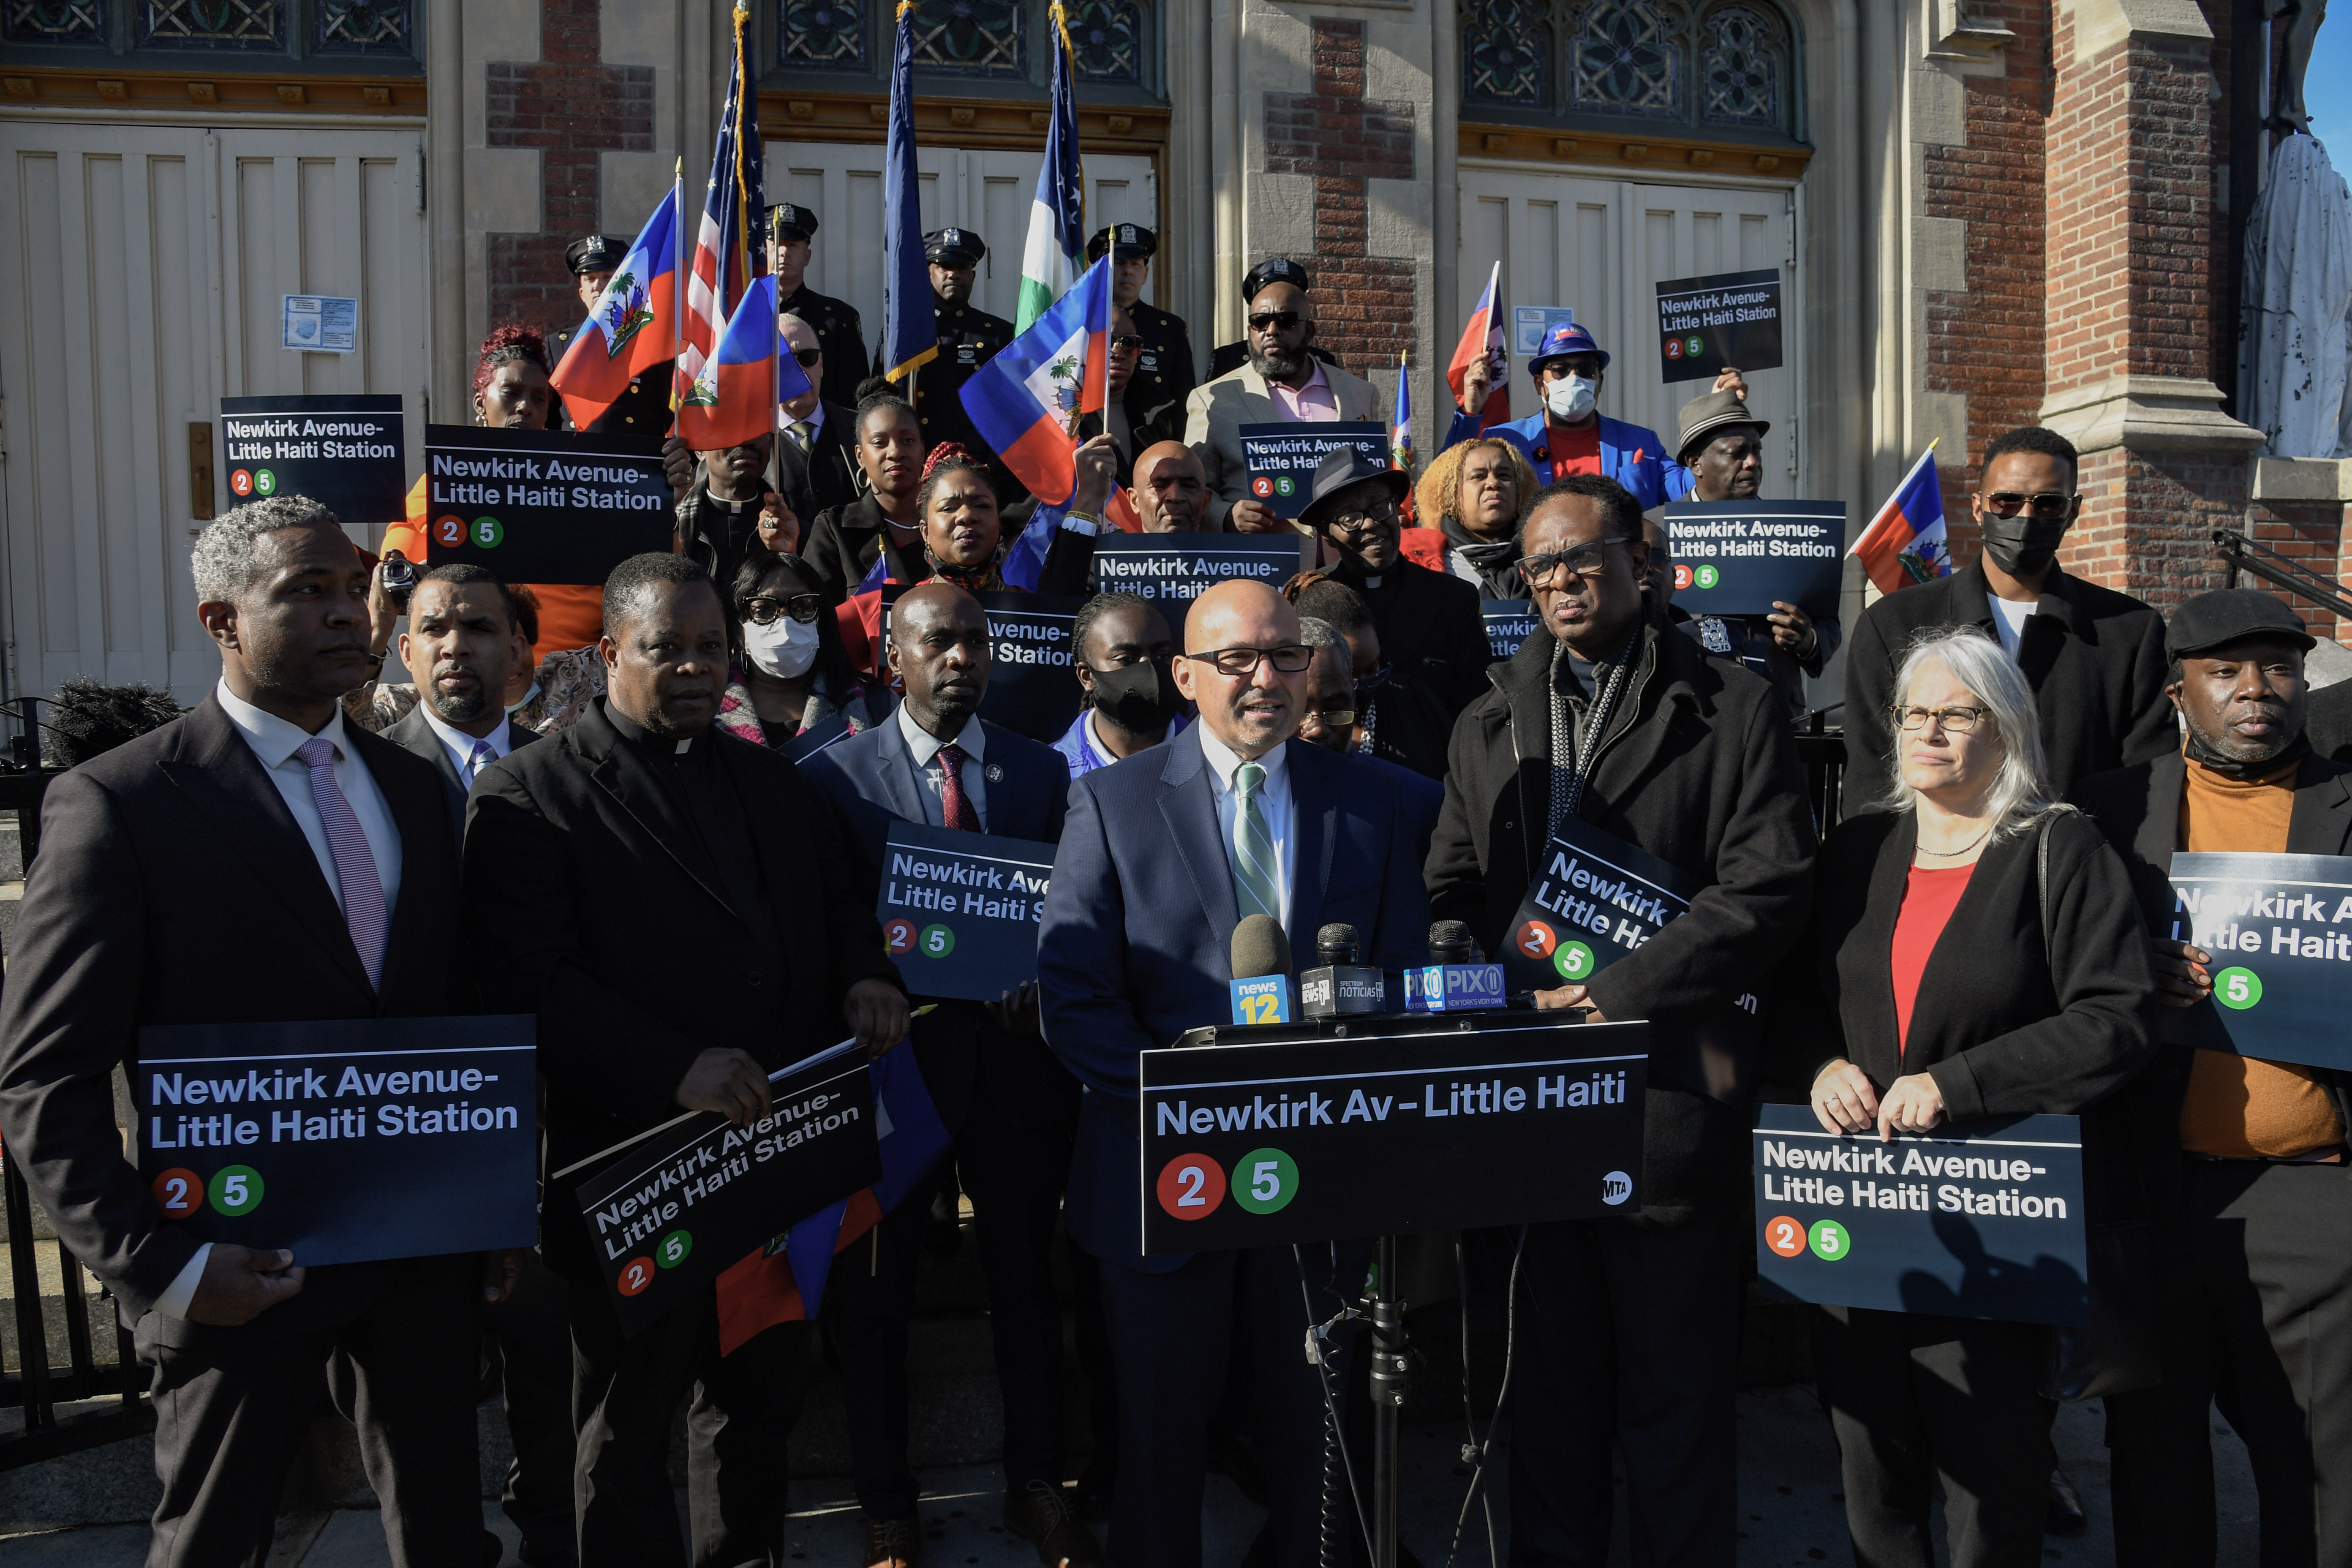 Interim MTA New York City Transit President Craig Cipriano and Senior Vice President of Subways Demetrius Crichlow join elected officials in a community celebration in front of St. Jerome Church to rename name the Newkirk Av station on the 2/5 lines as Newkirk Av-Little Haiti on Thu., November 18, 2021.